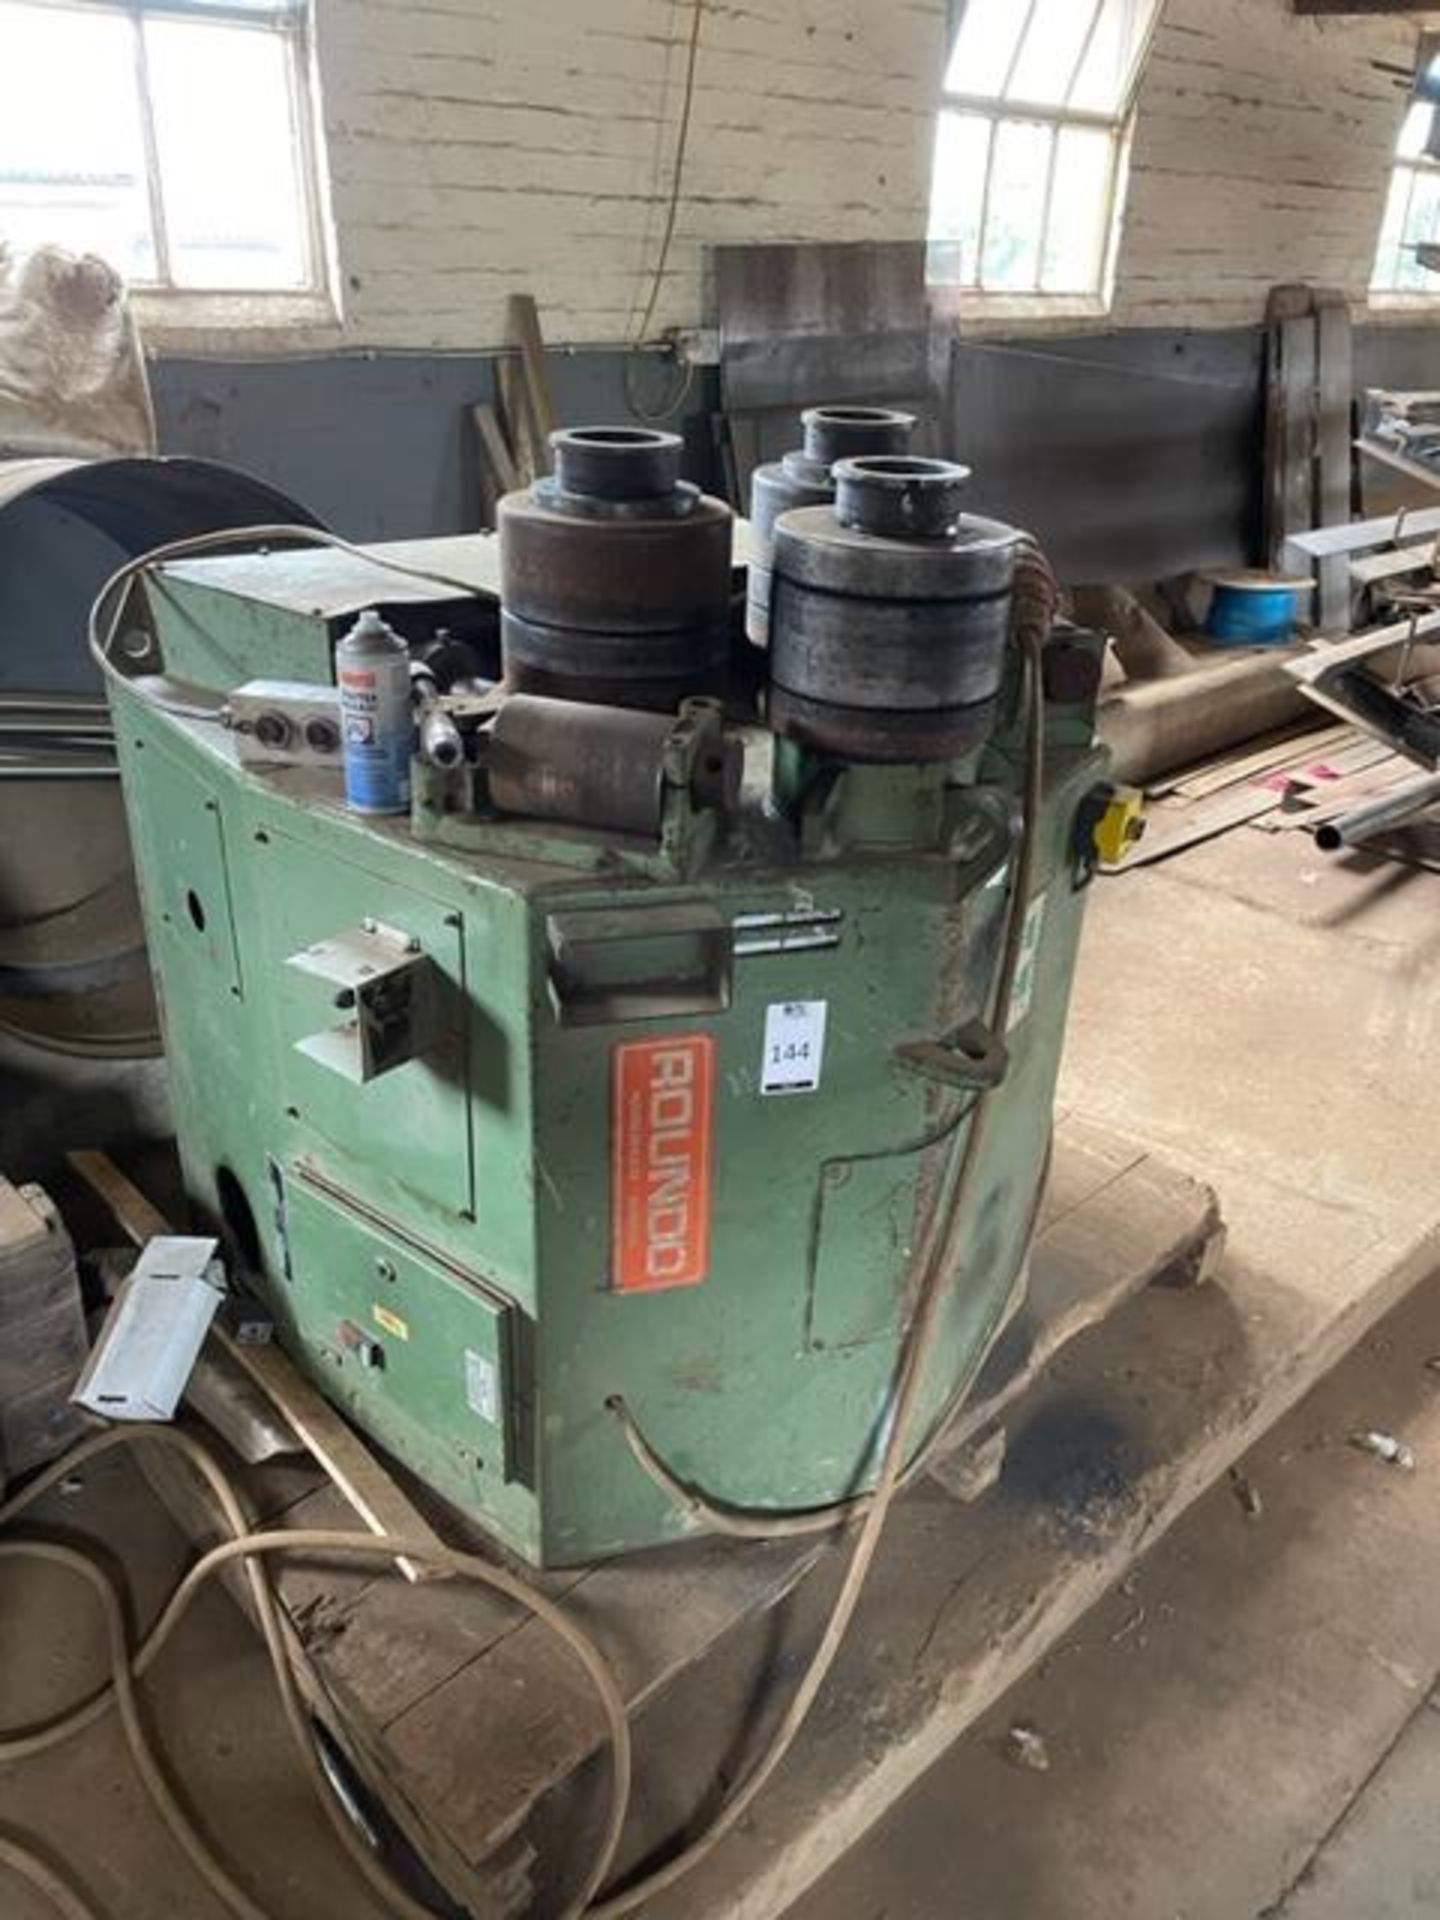 Roundo AB Sweden R3 Section/Profile Bender, Machine Number 884215 with Foot-Pedal Control (Location: